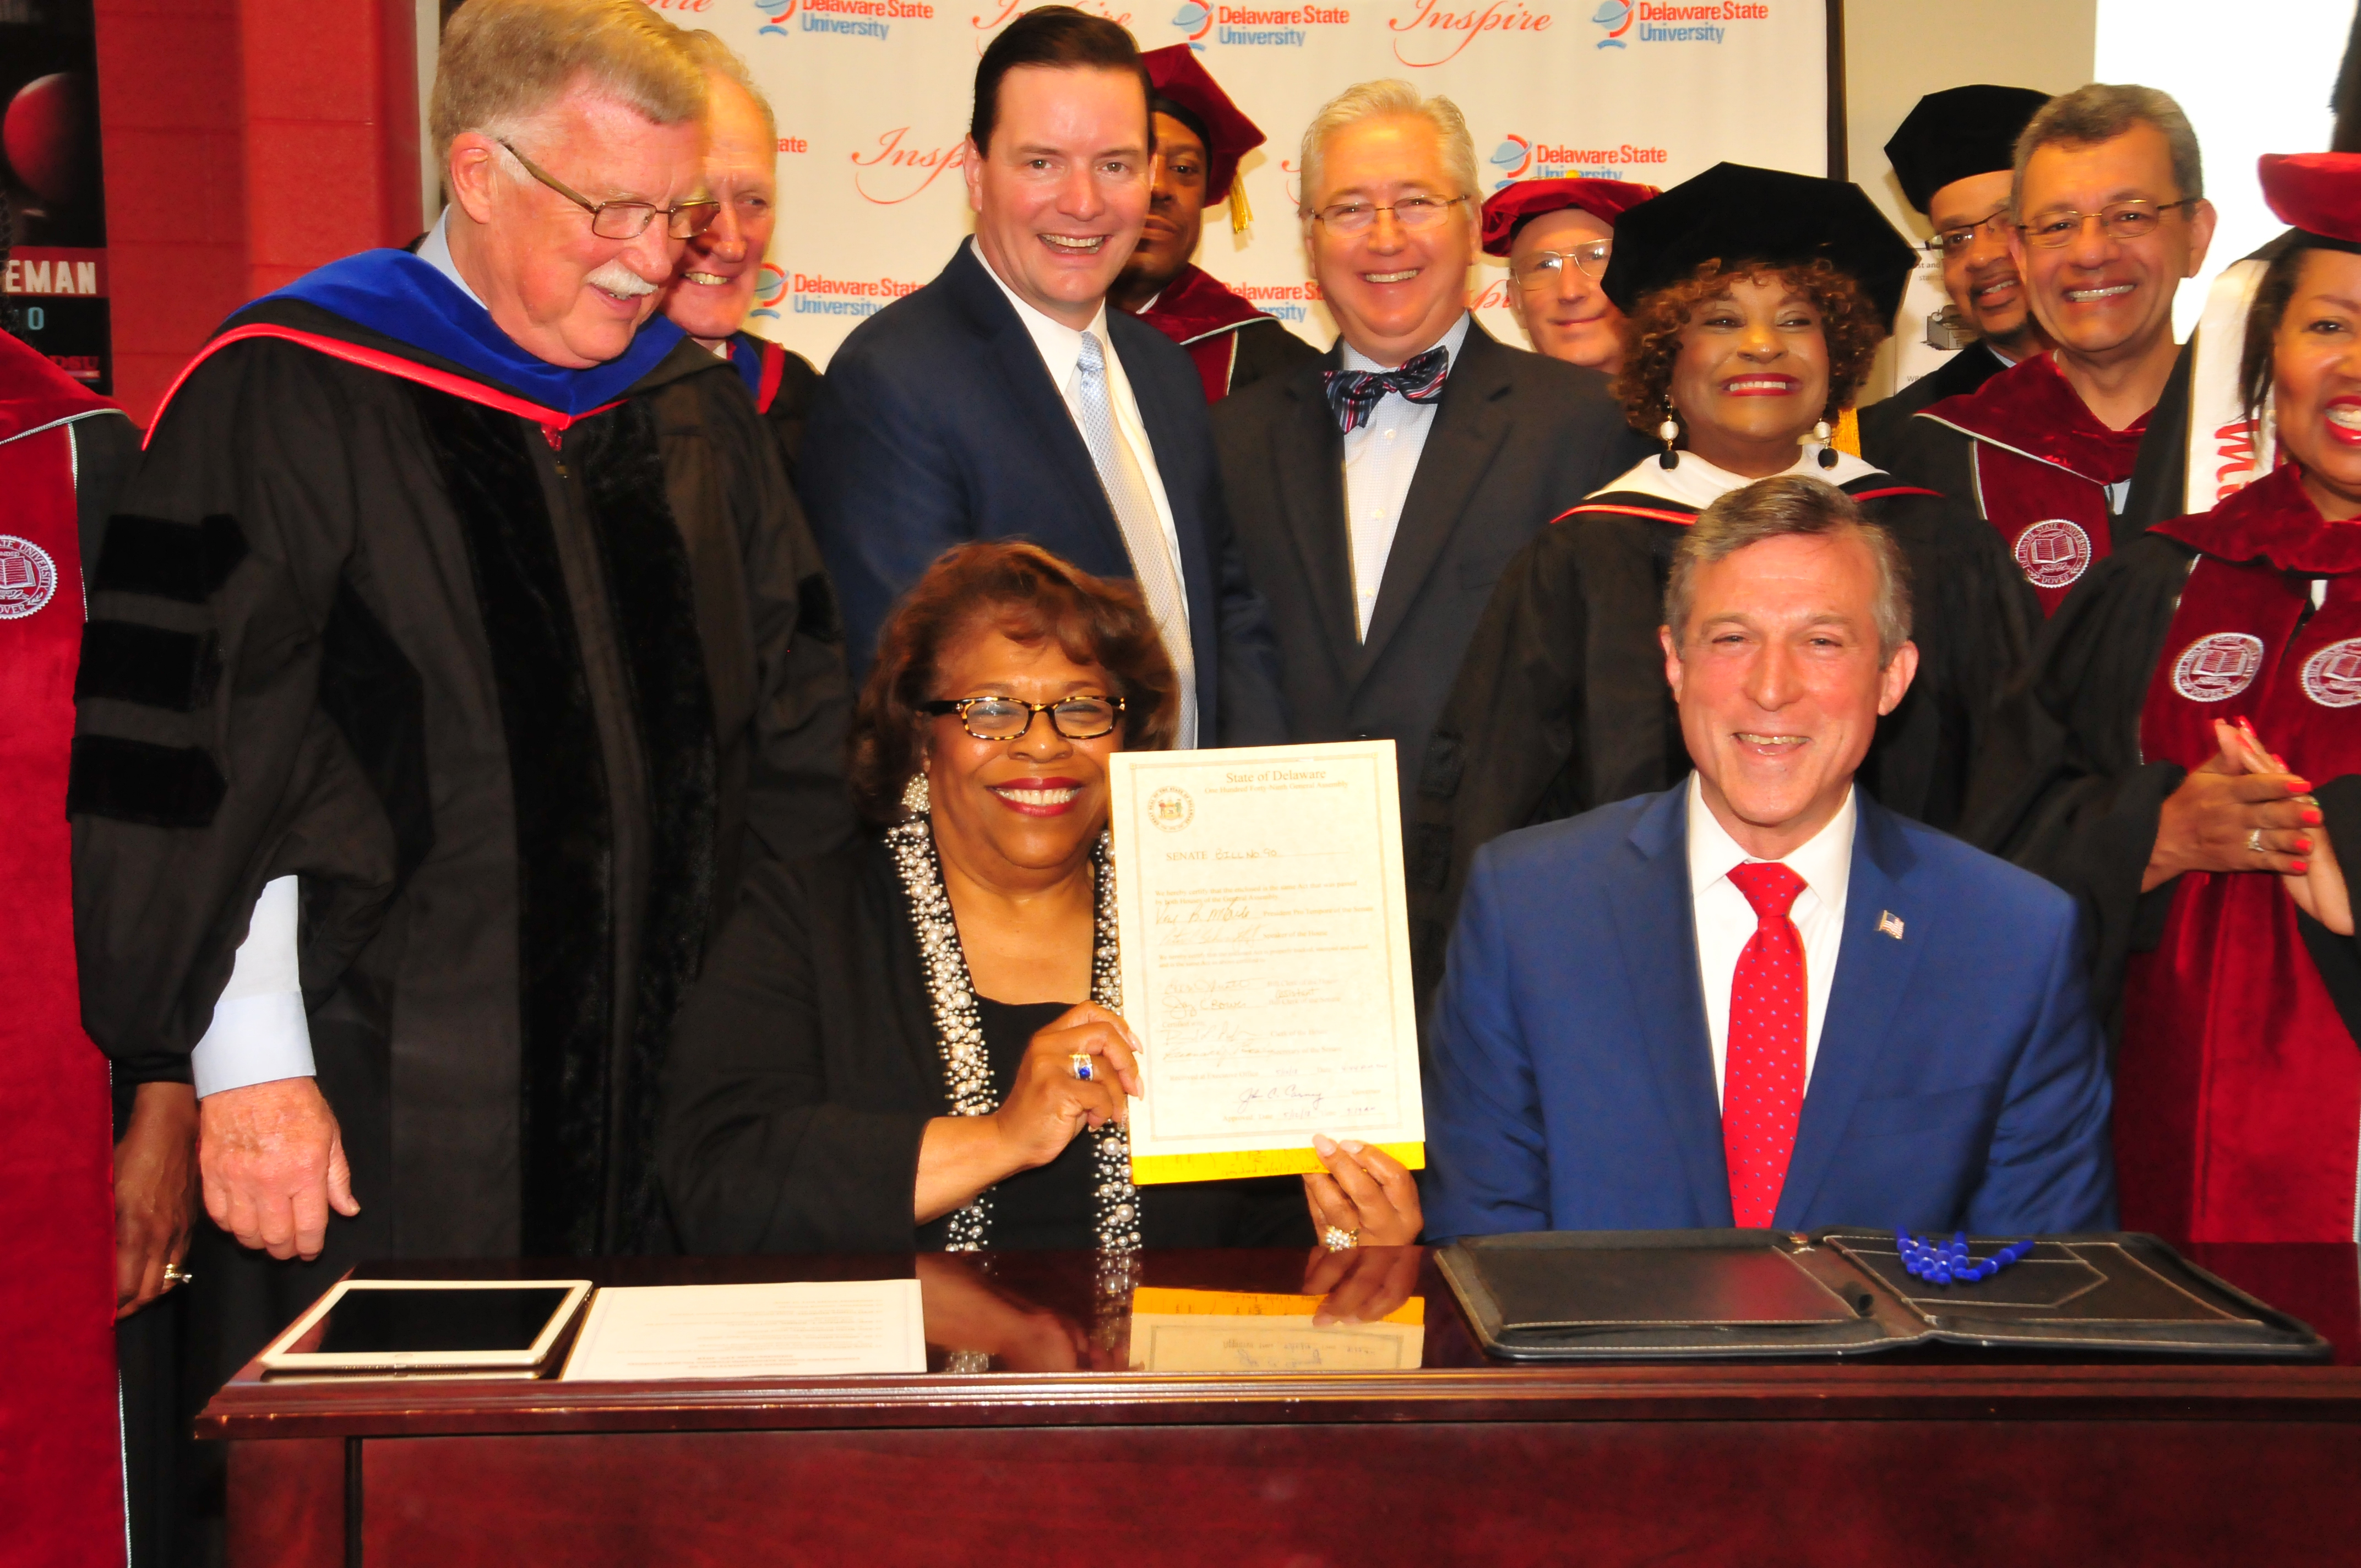 Interim DSU President Wilma Mishoe holds the legislation just signed May 12 by Gov. John Carney (seated next to her) that adds a fourth year of state funding to the Inspire Scholarship Program. 